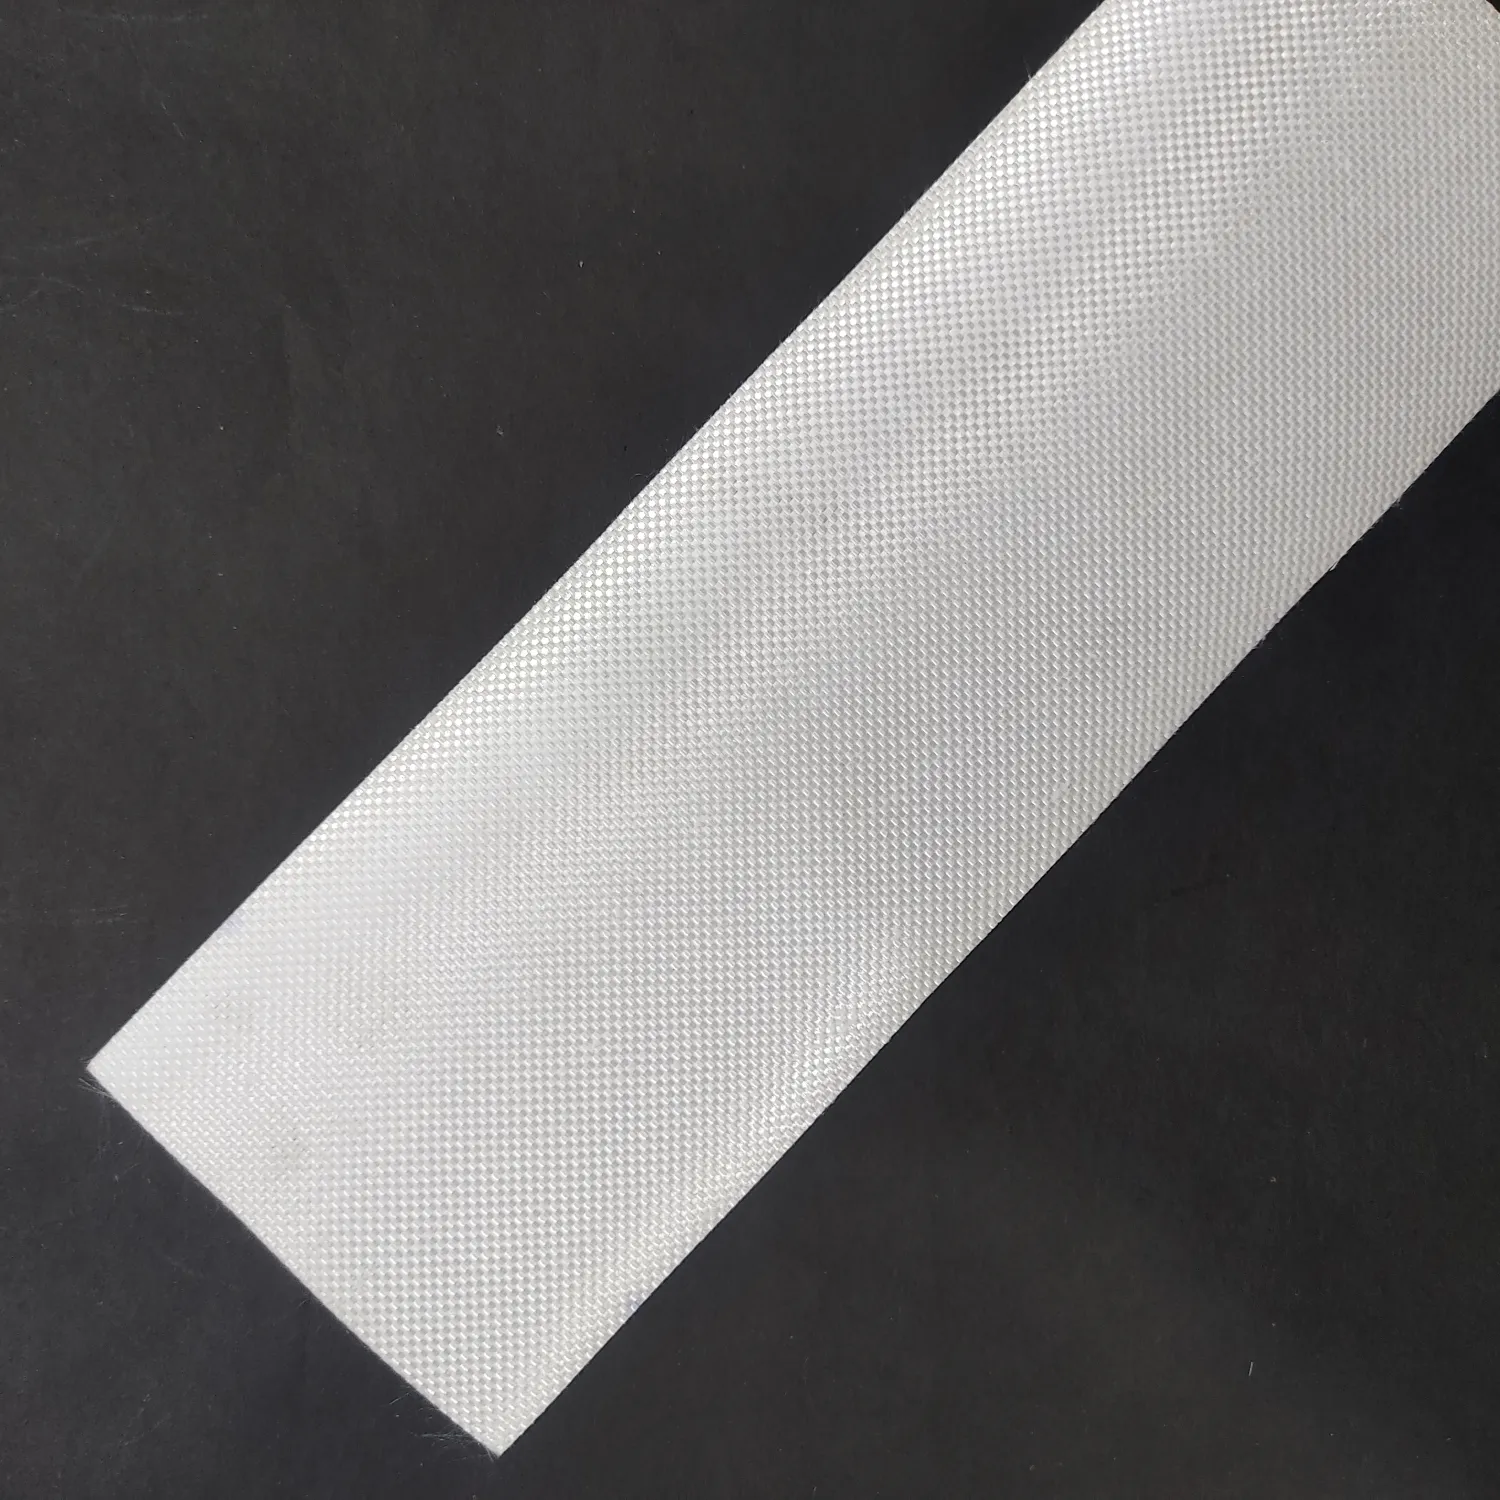 CSC PVC Fabric back white, red